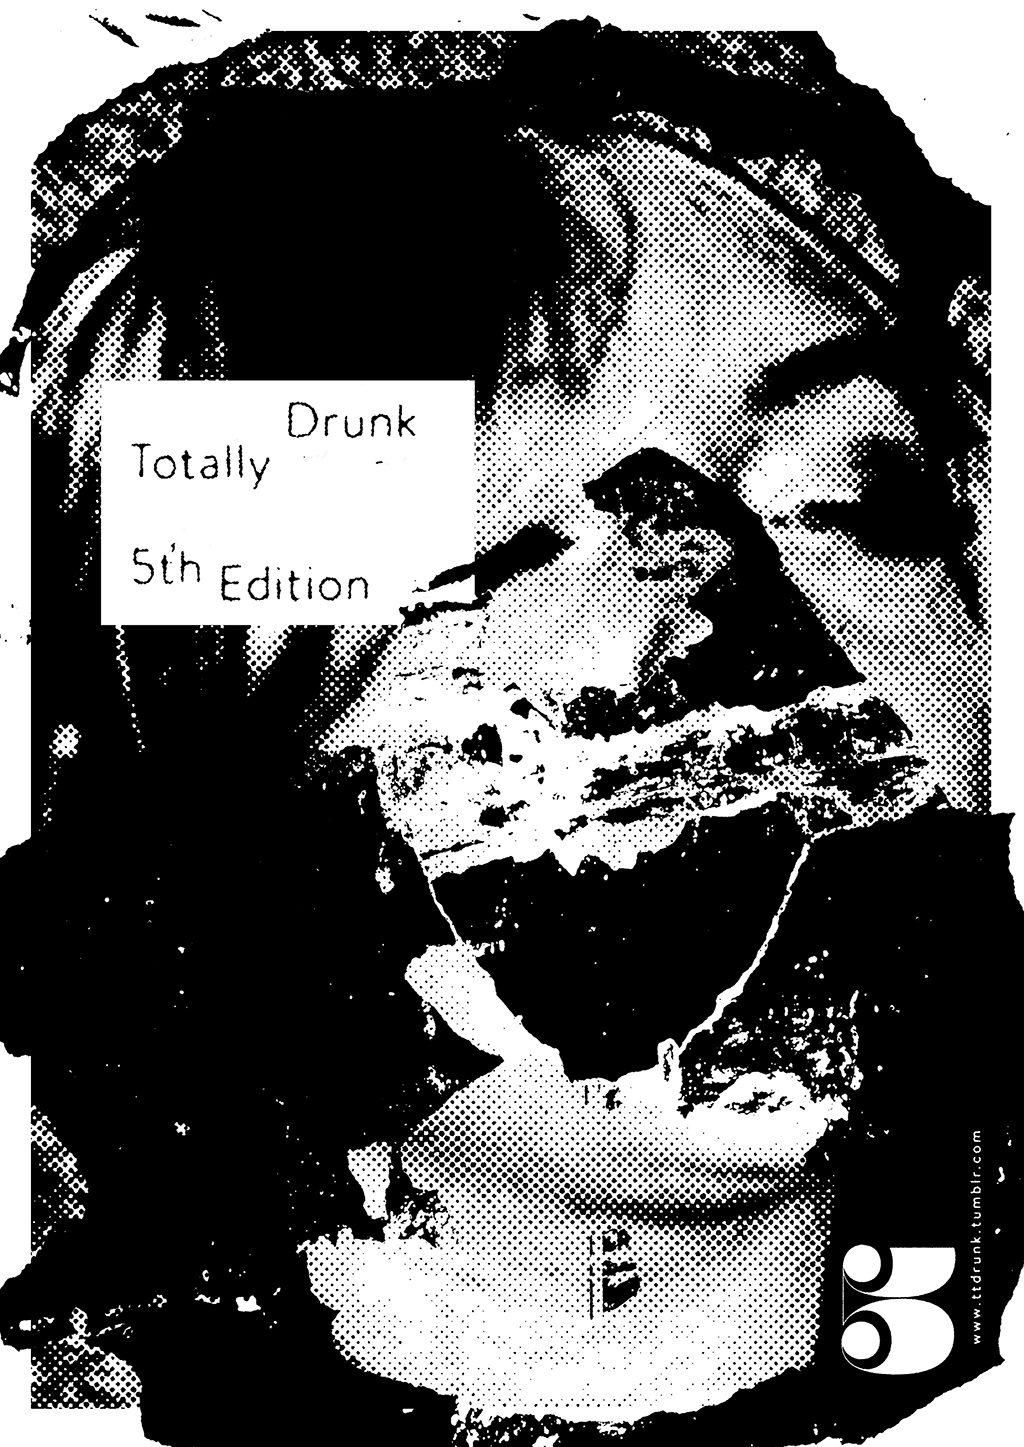 Totally Drunk 5th Edition This was originally going to be the second part of a diptych along side of the Jimmy Savile is a Creep poster. The thought behind it focuses on the victim Lindsay Lohan and the effects of being a child actor. Similar to The Savile piece, this shows a partial portrait along with literally blacked-out memories.